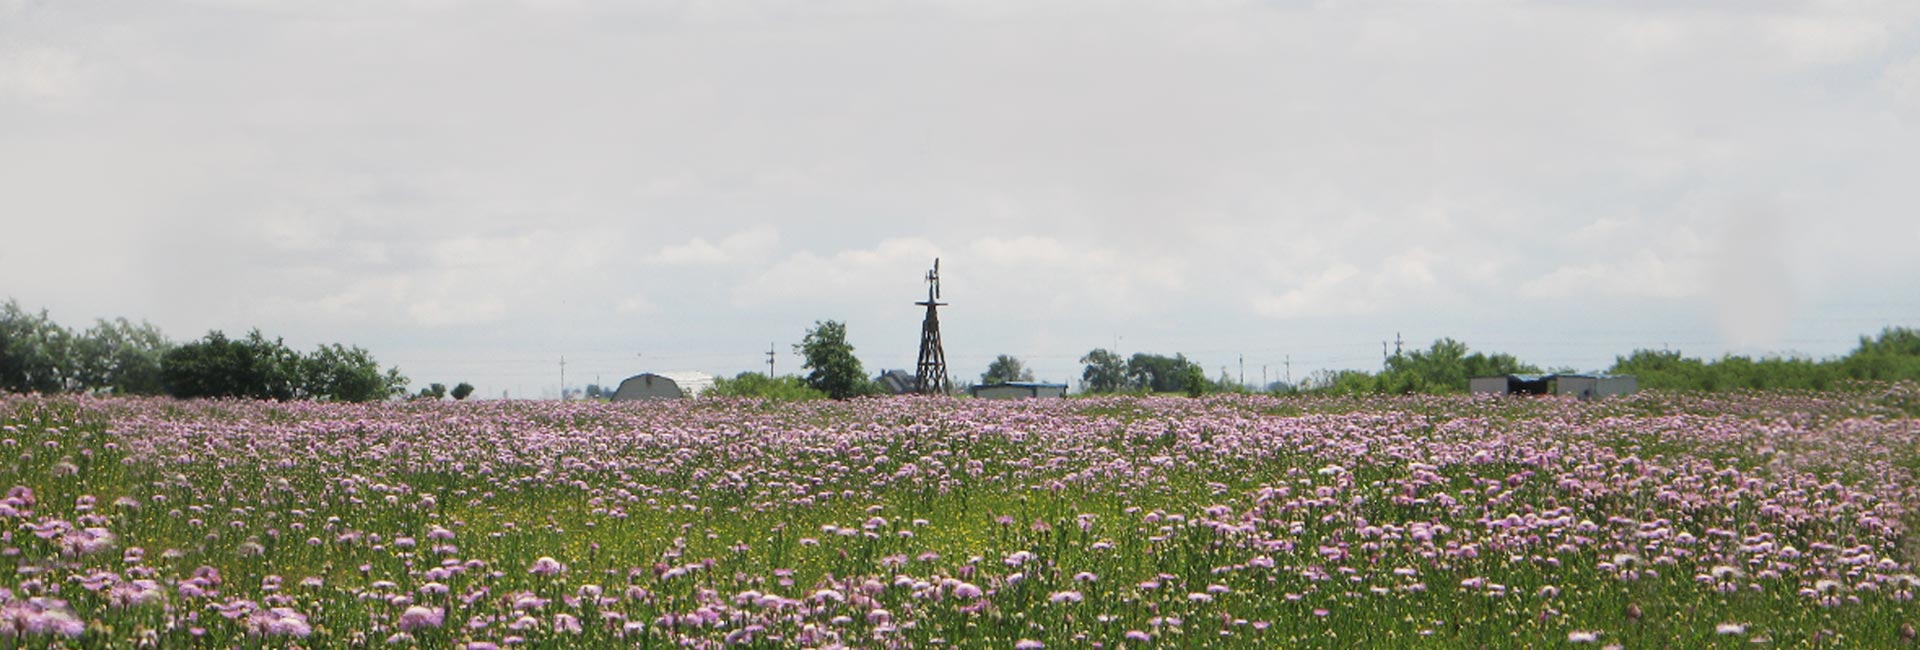 Grassland with Pink Flowers